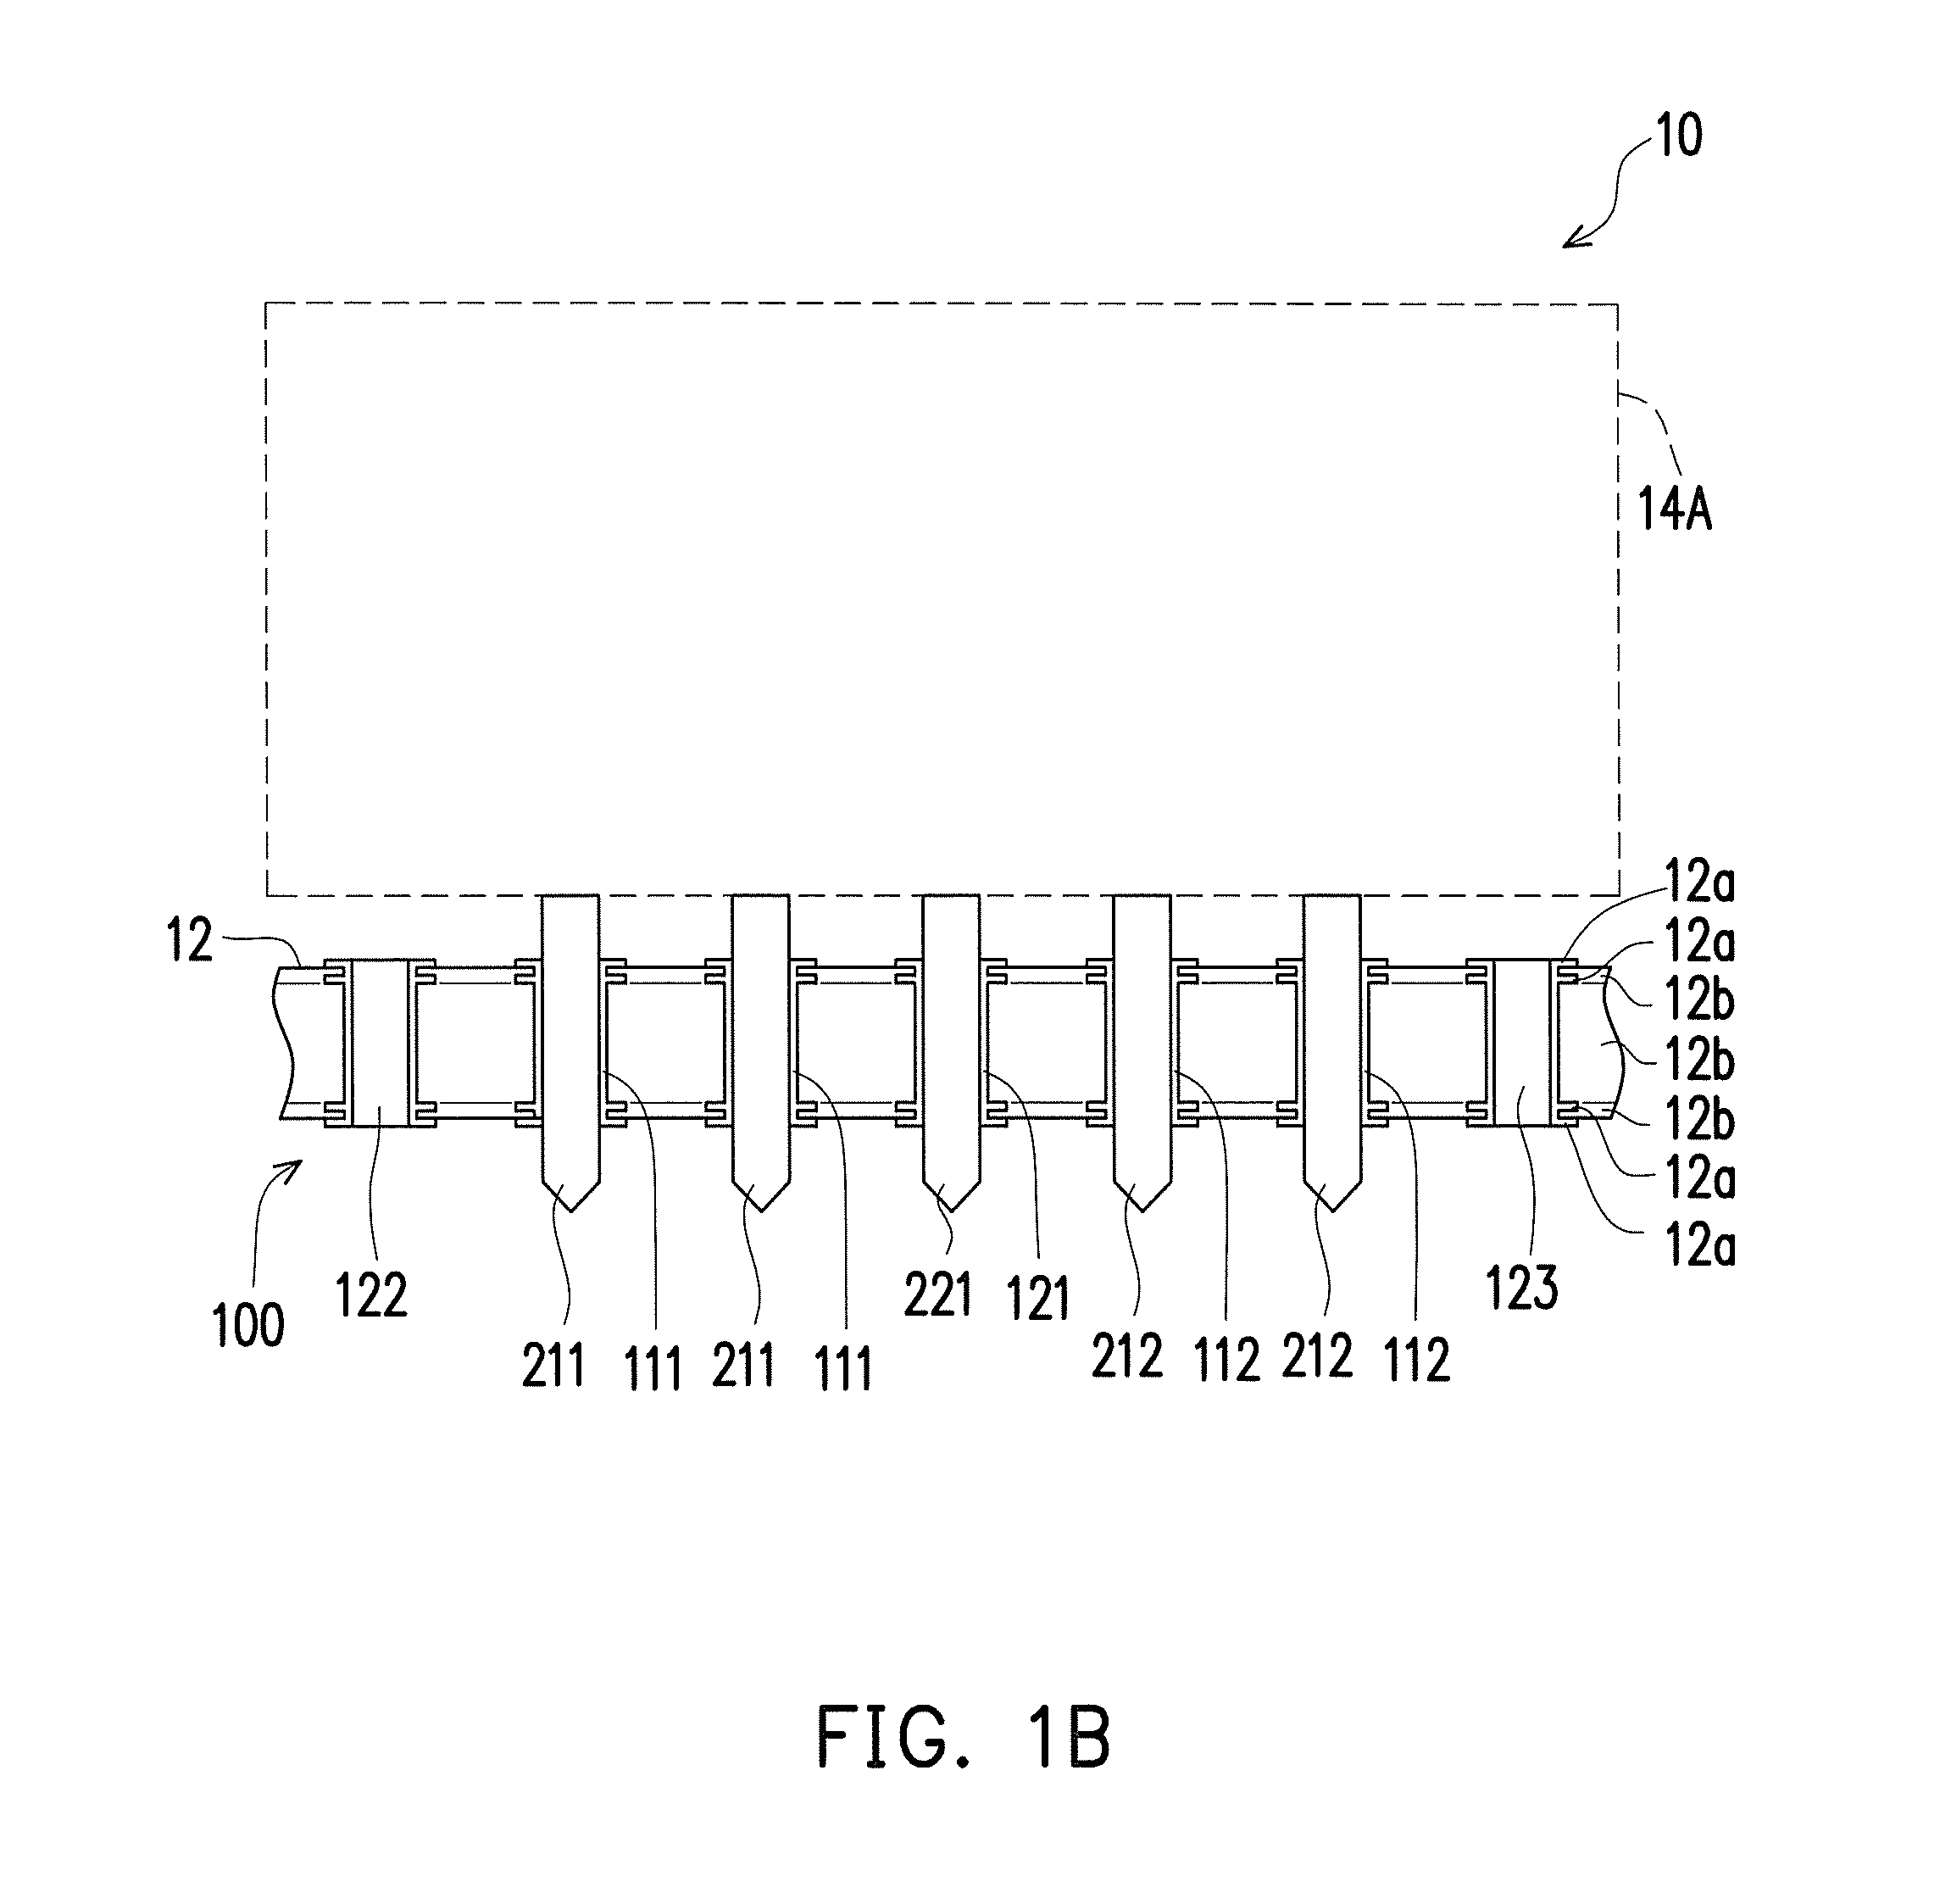 Through-hole layout structure, circuit board, and electronic assembly